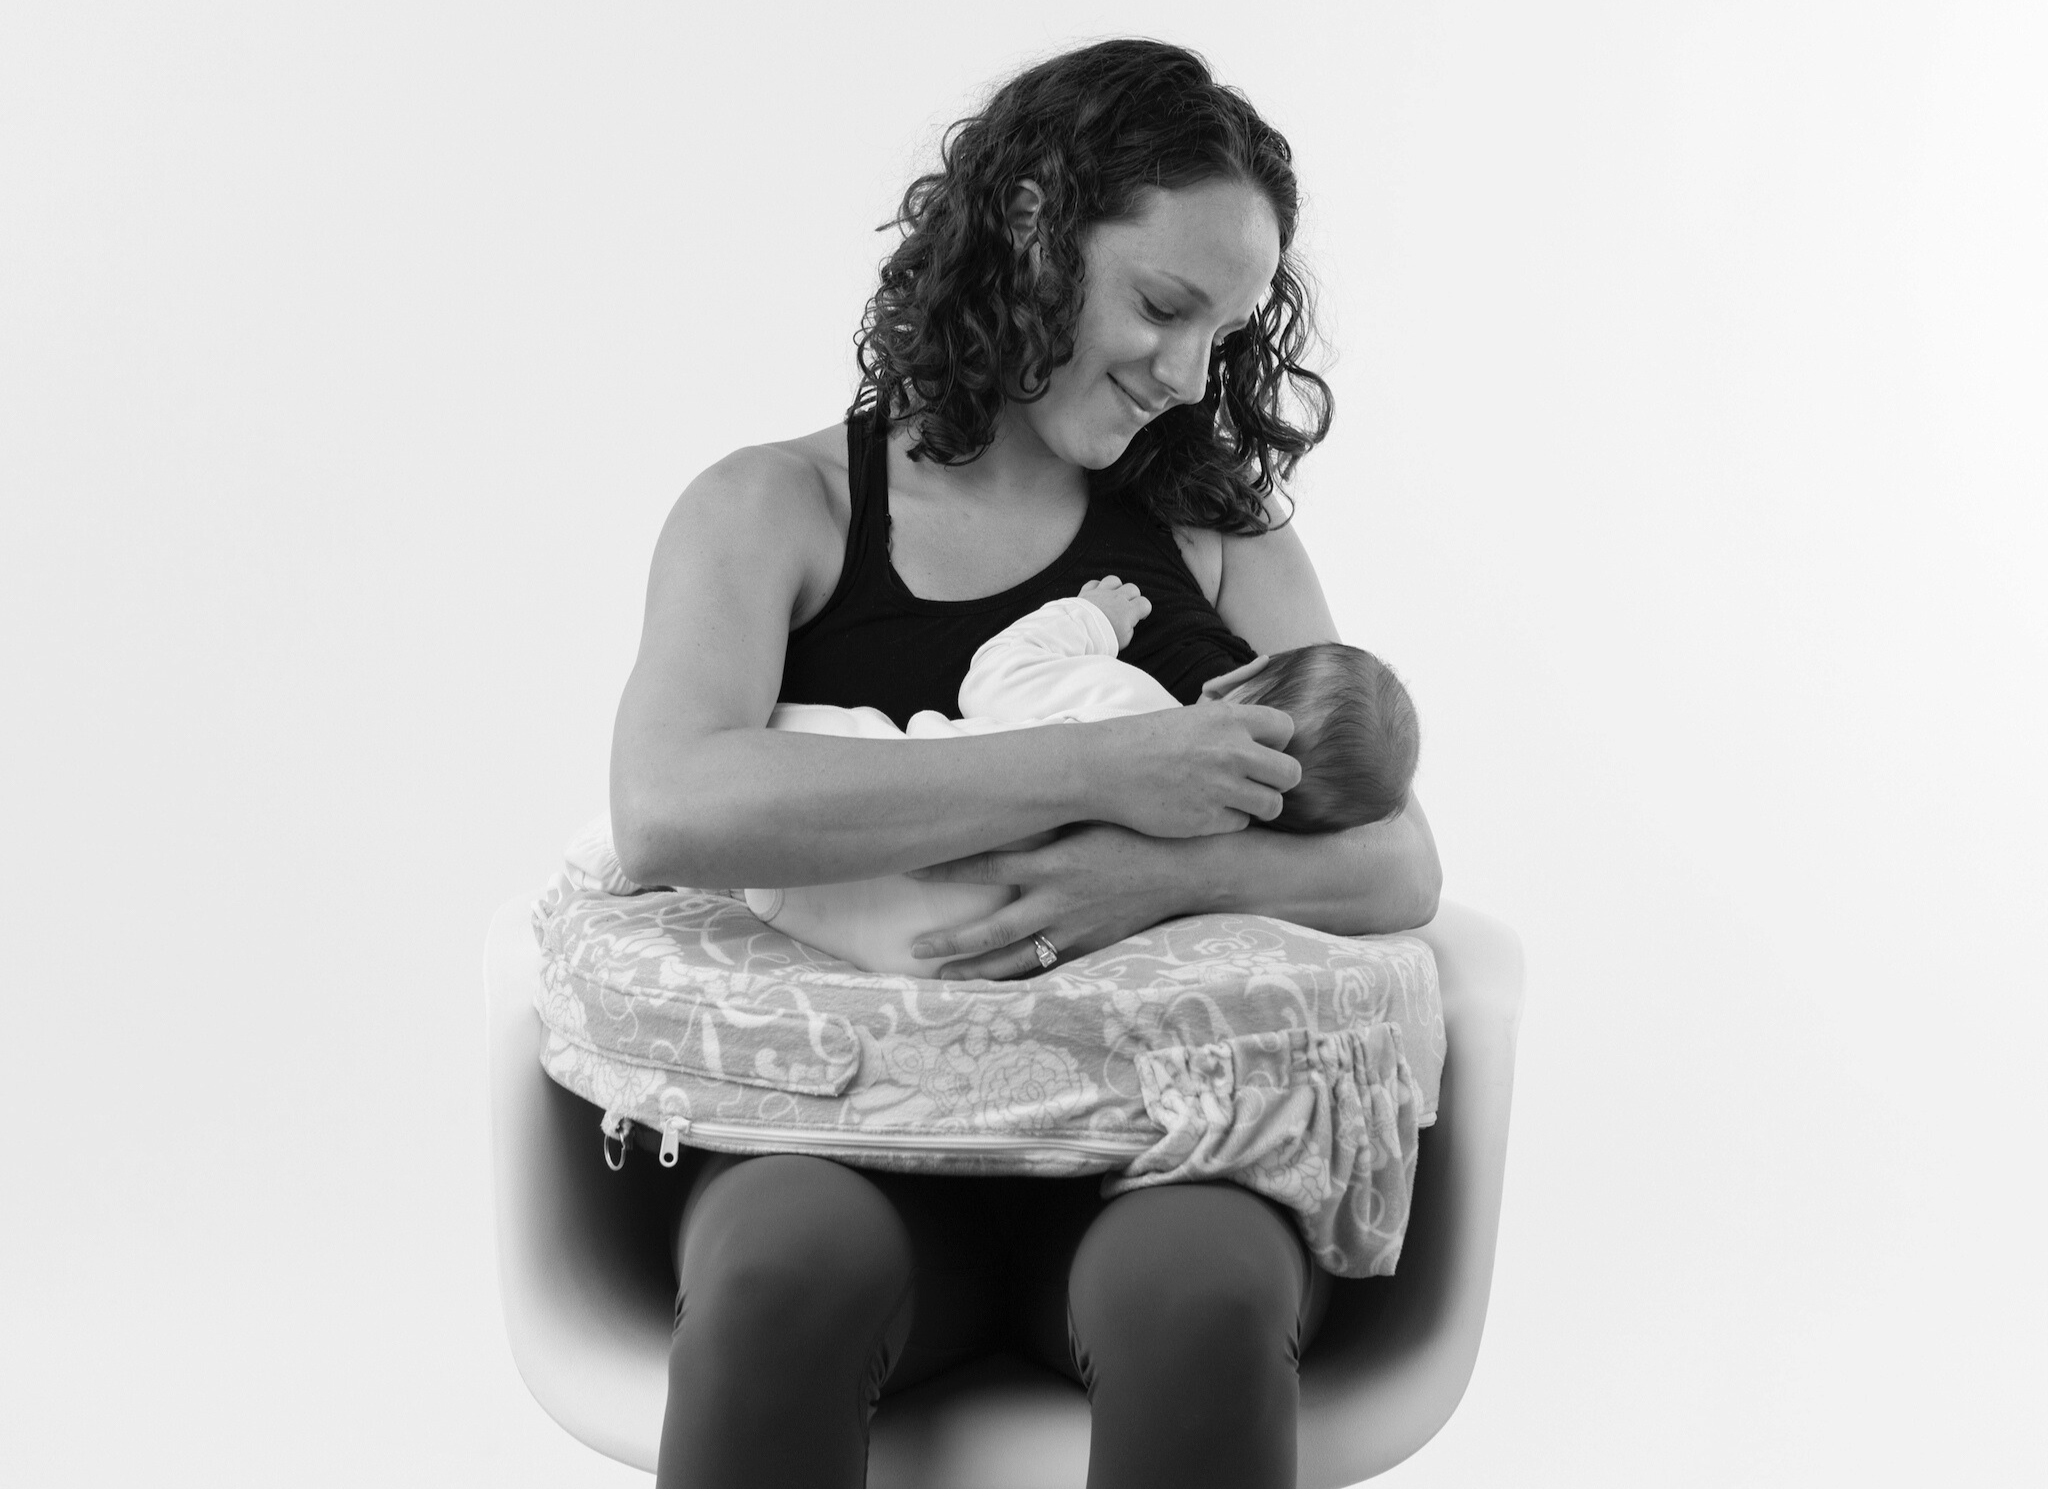 Frida Mom 2-in-1 Lactation Massager, Breastfeeding Supplement with